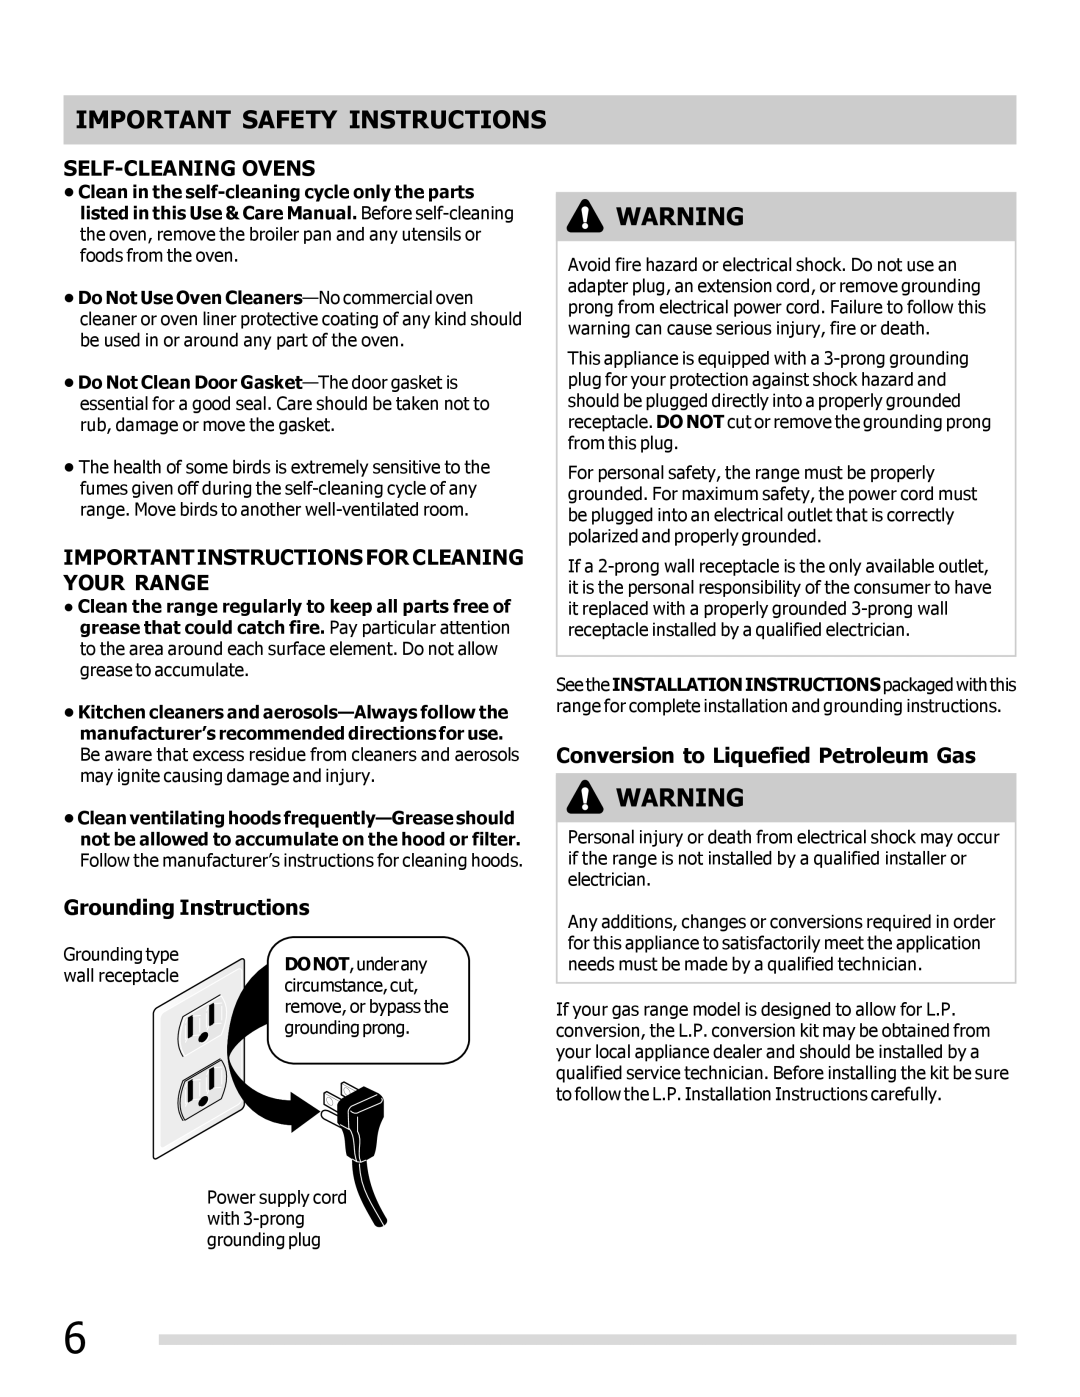 Frigidaire FGGF3056KF Self-Cleaningovens, Important Instructions For Cleaning Your Range, Grounding Instructions 